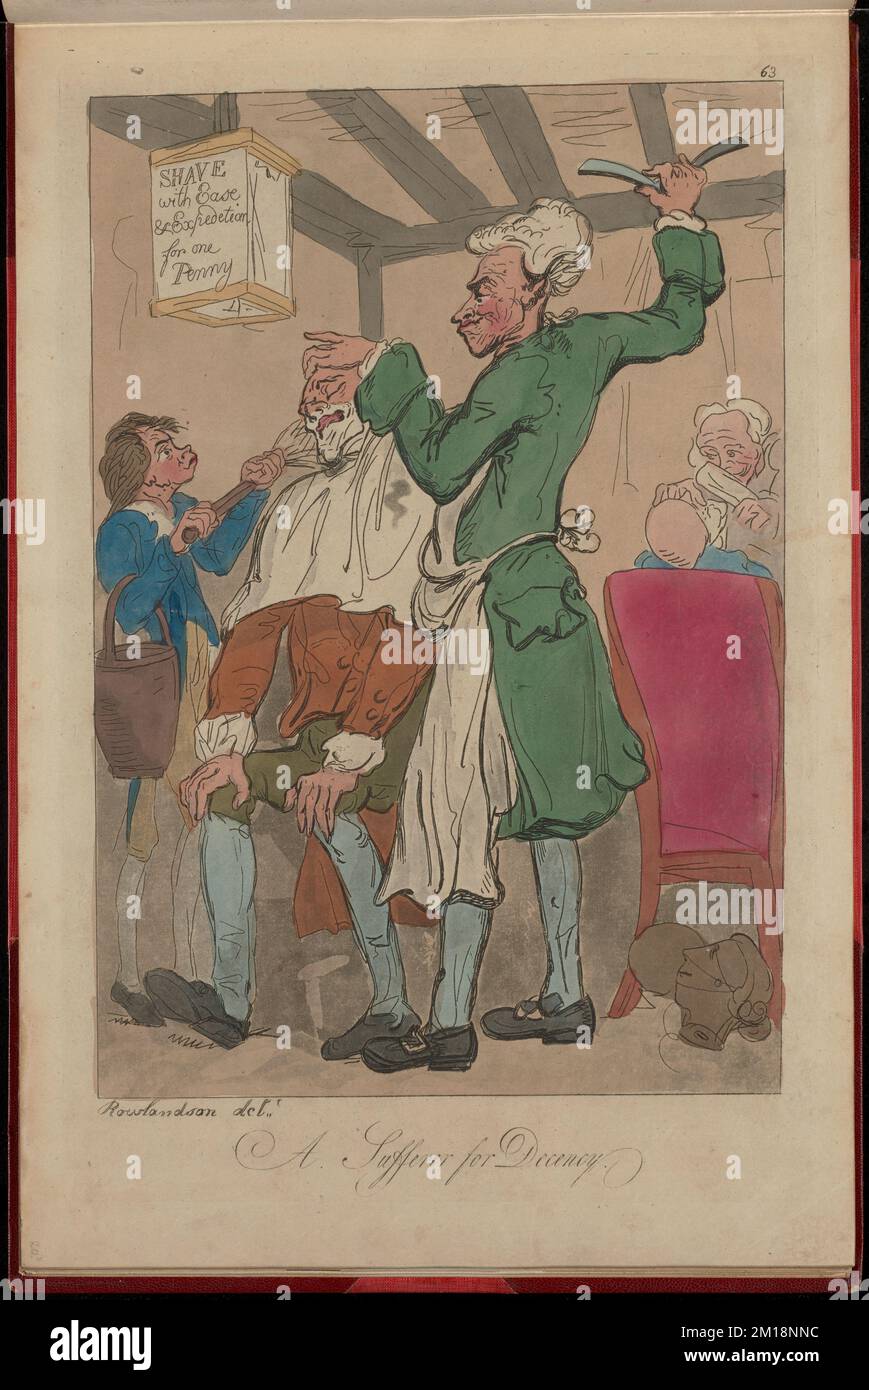 A sufferer for decency , Barbers, Barbershops, Shaving. Thomas Rowlandson (1756-1827). Prints and Drawings Stock Photo